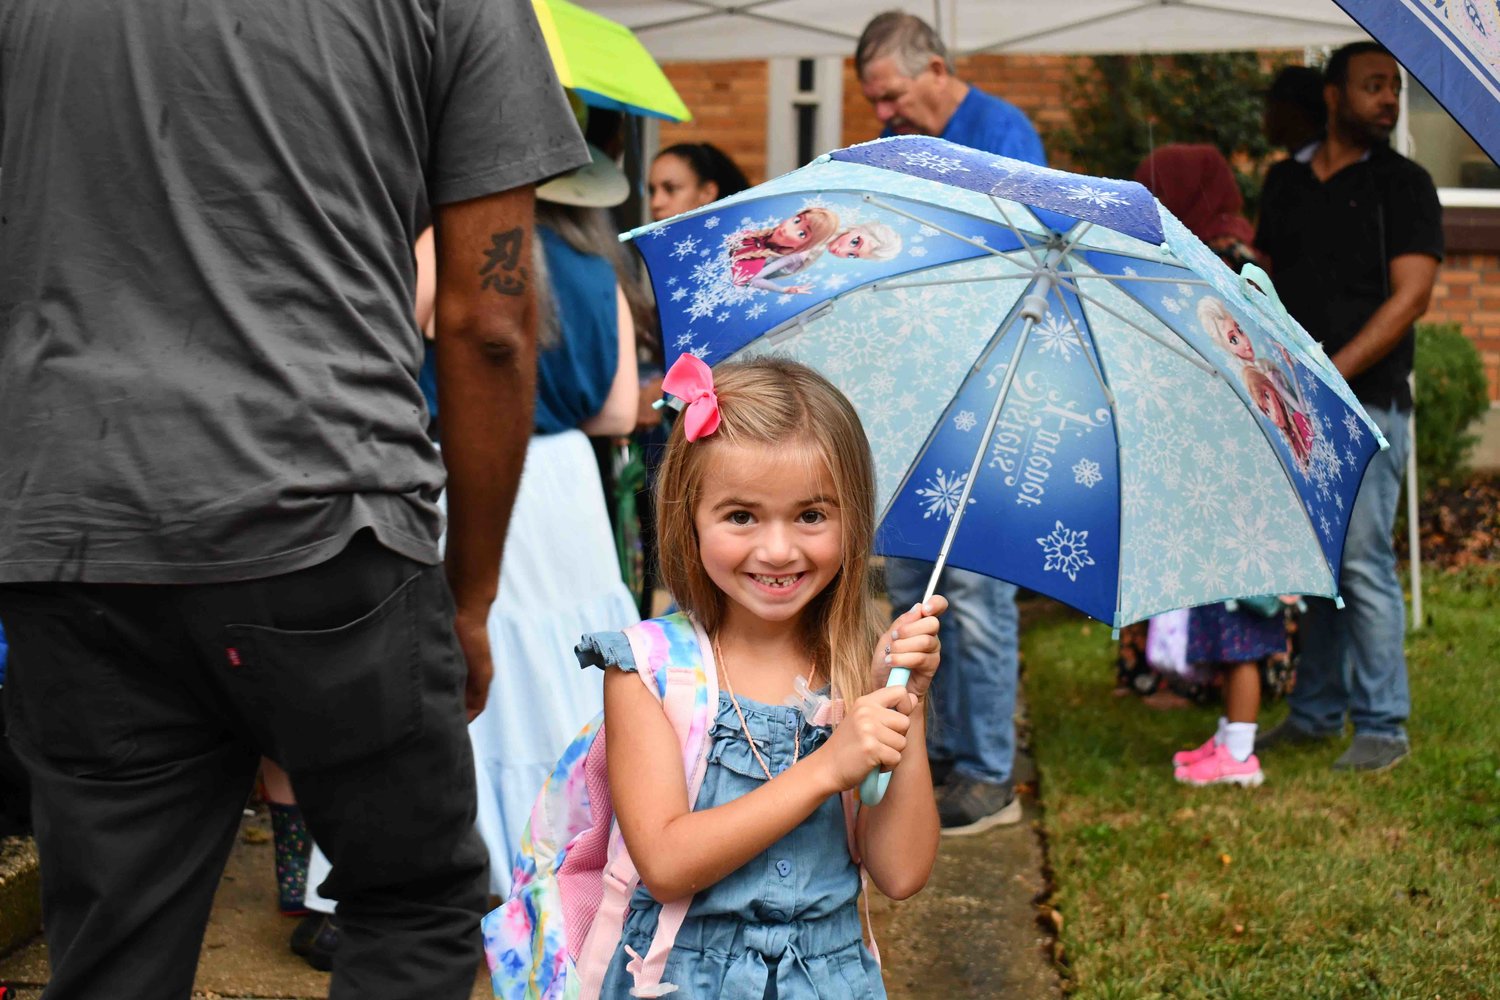 Ava, aged five, eagerly awaited her first day of Kindergarten outside of Maurice W. Downing School, shielded from the rain by a Frozen umbrella.